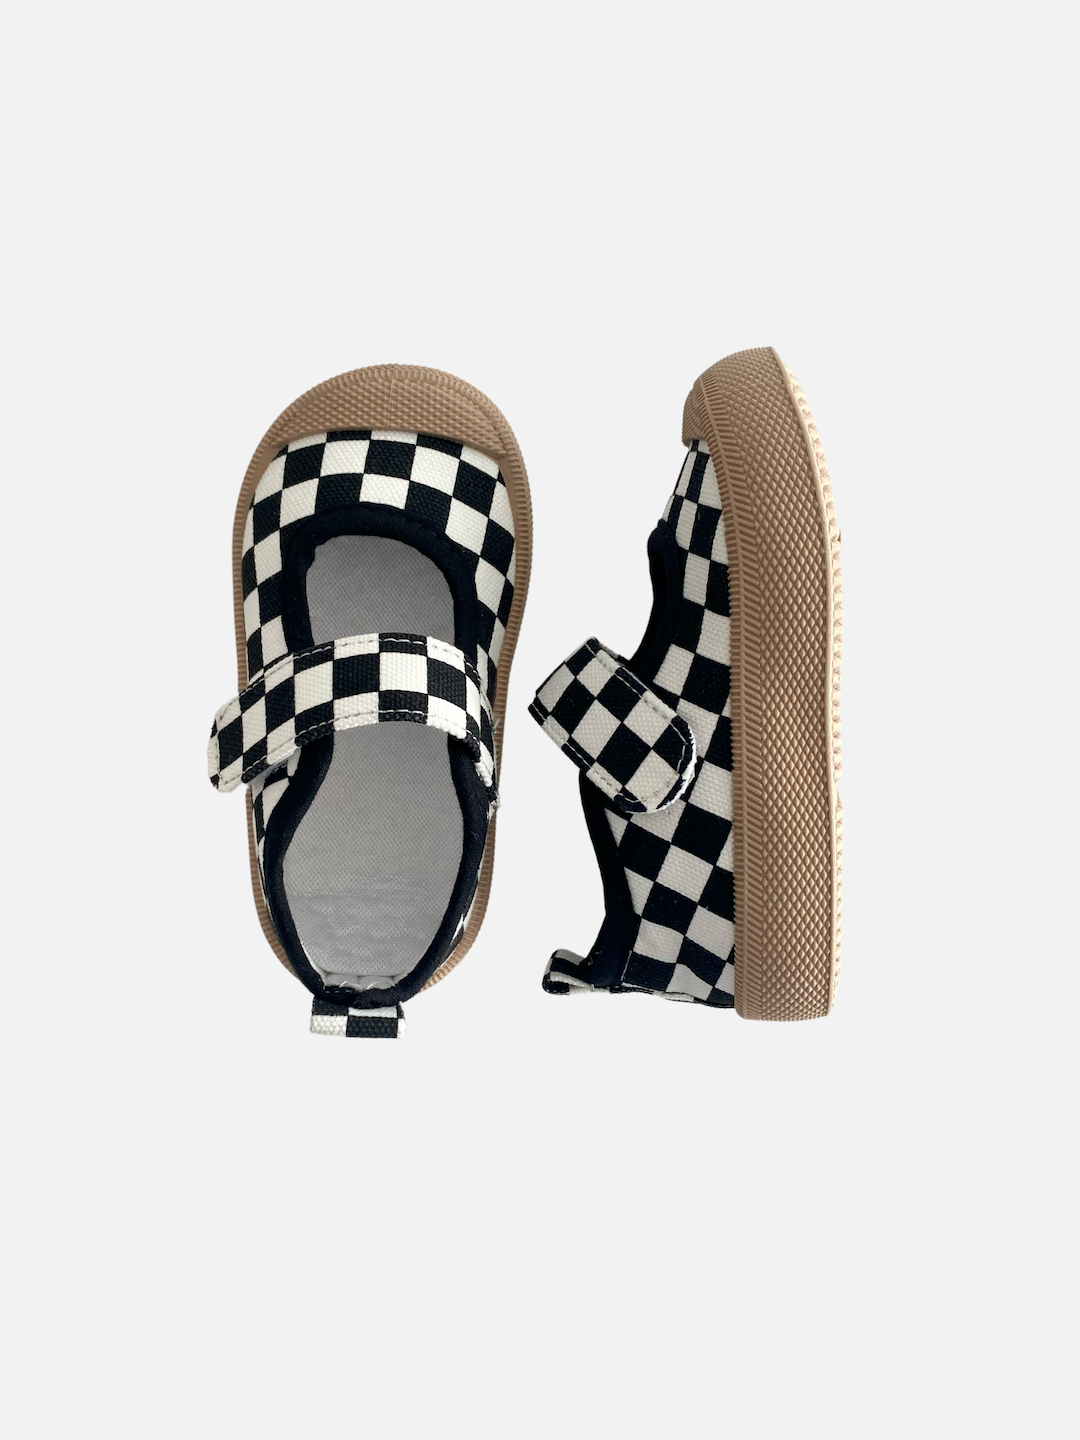 A pair of toddler mary jane sneakers in a black-and-white checkerboard, top and side view